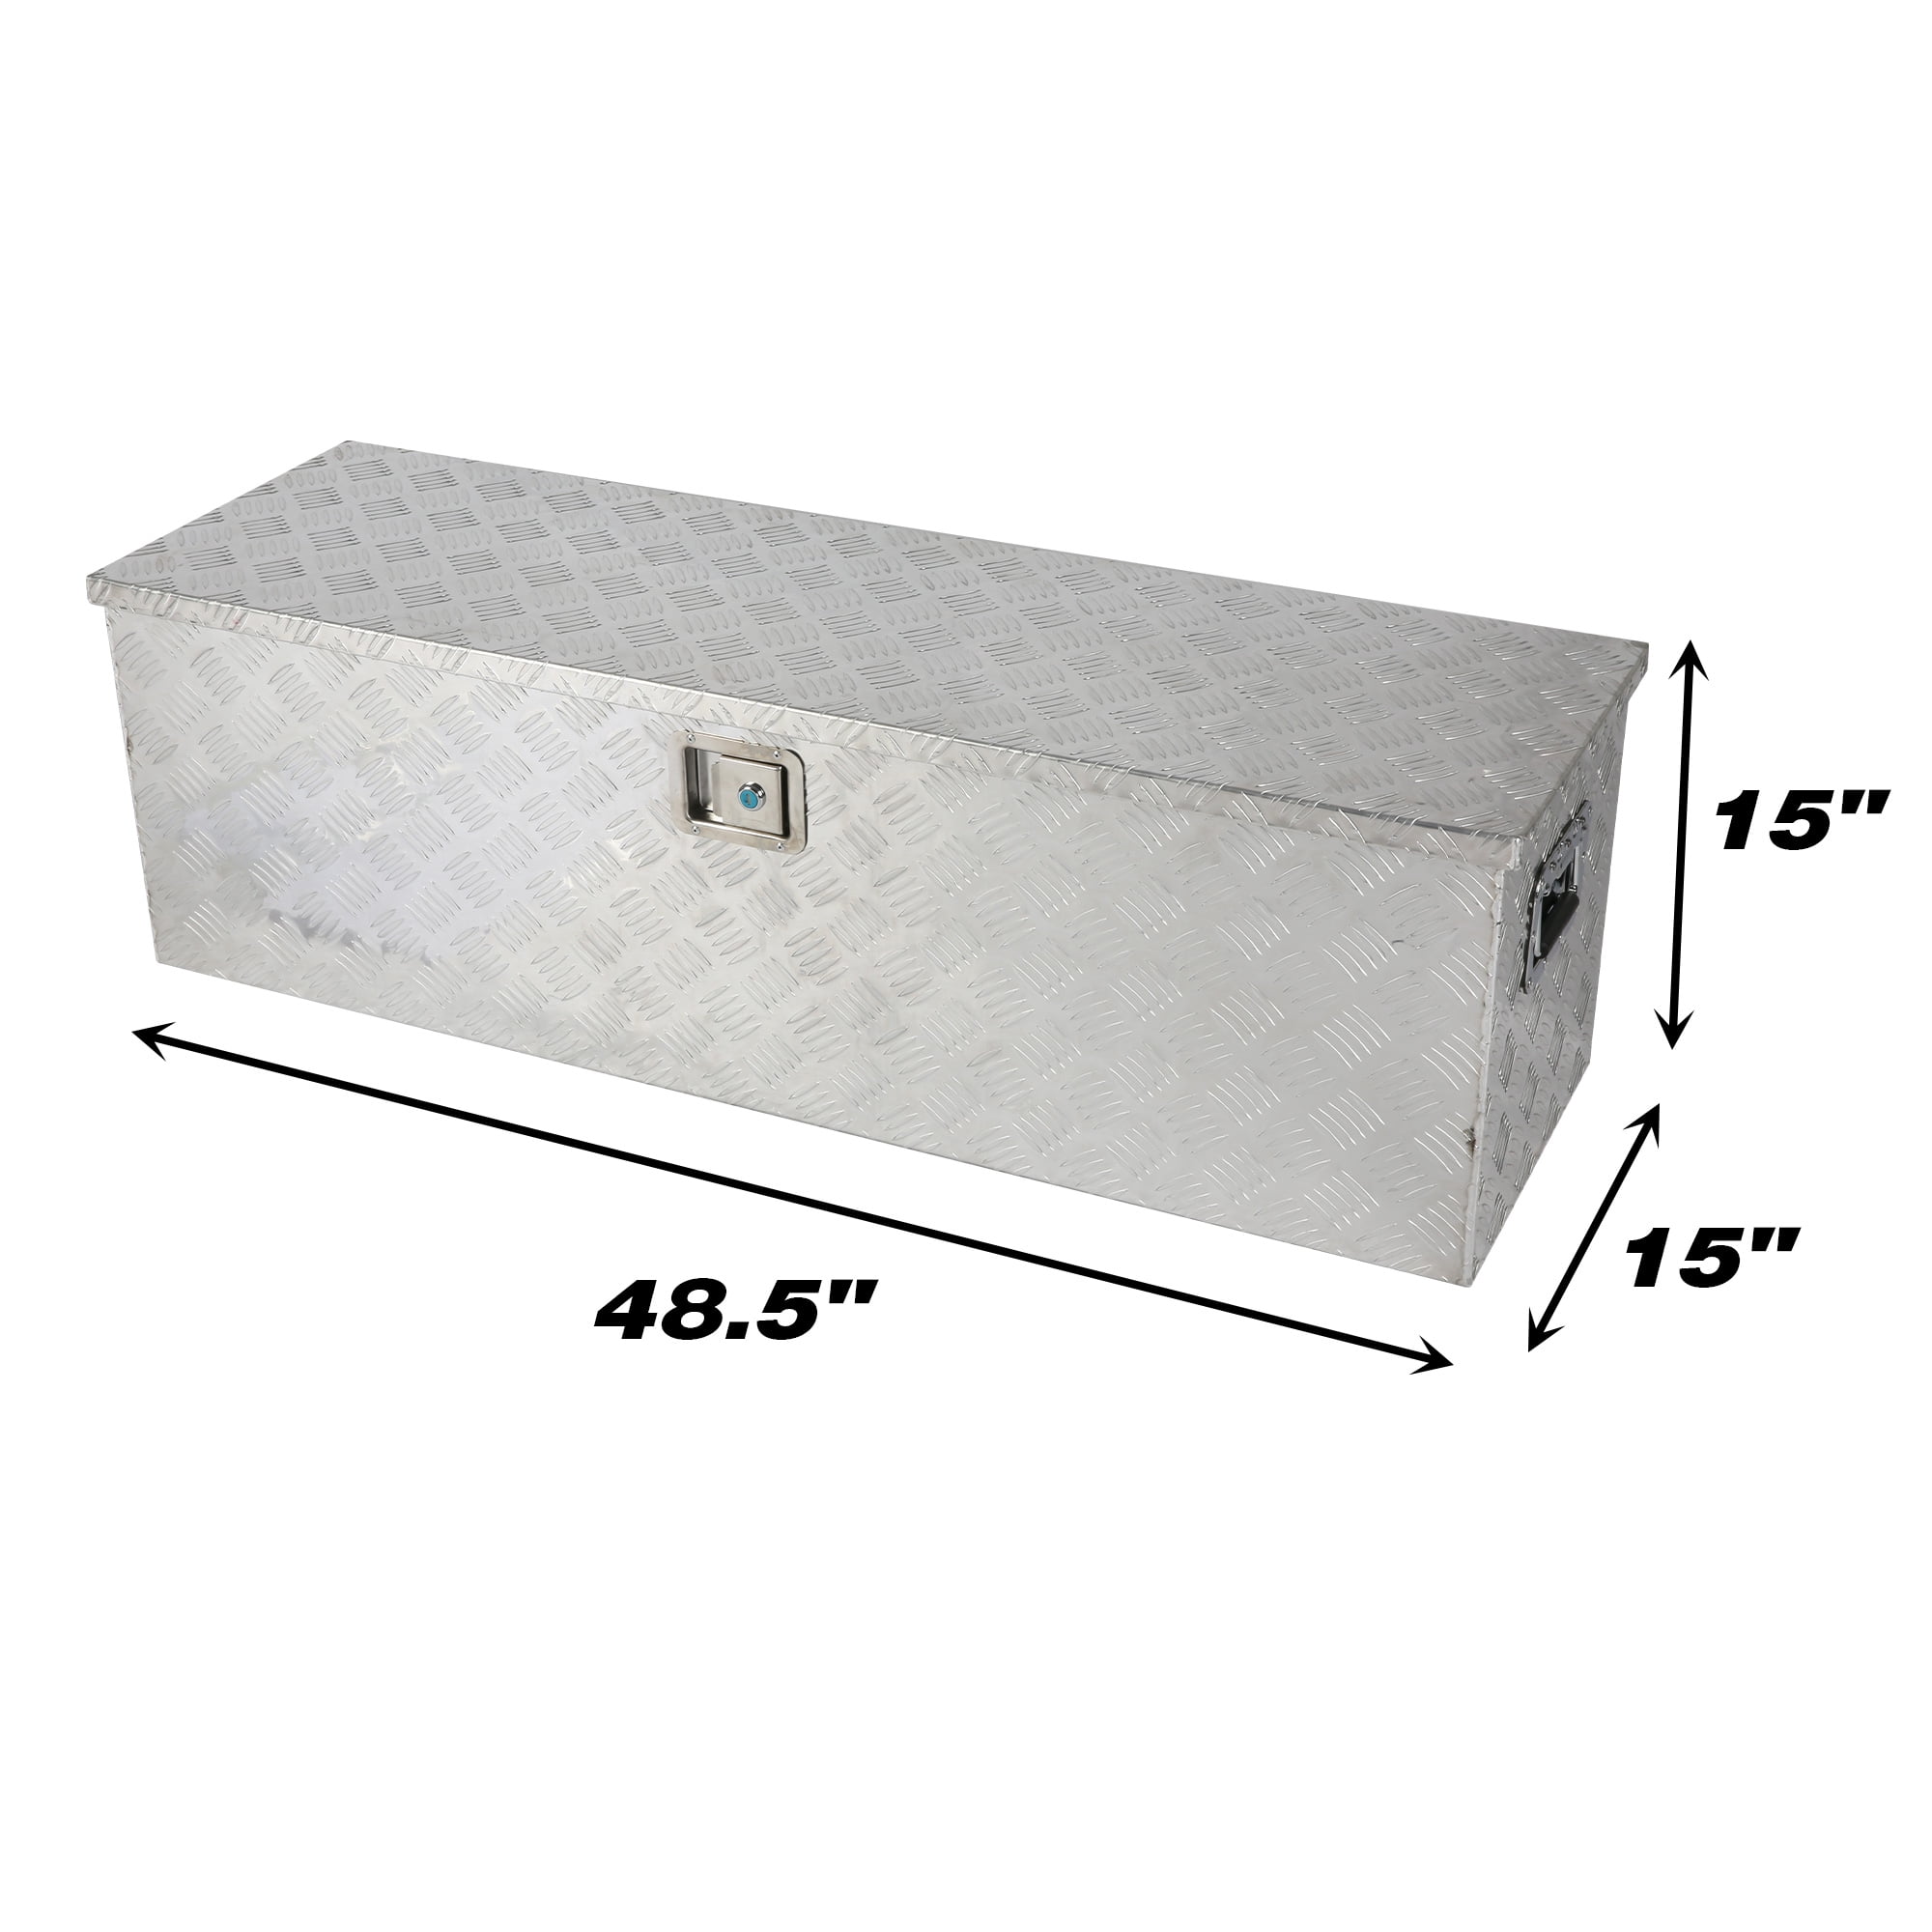 Details about    Aluminum Tool Box Truck Pickup Trailer Storage Space W/ Hand Shank Silver 